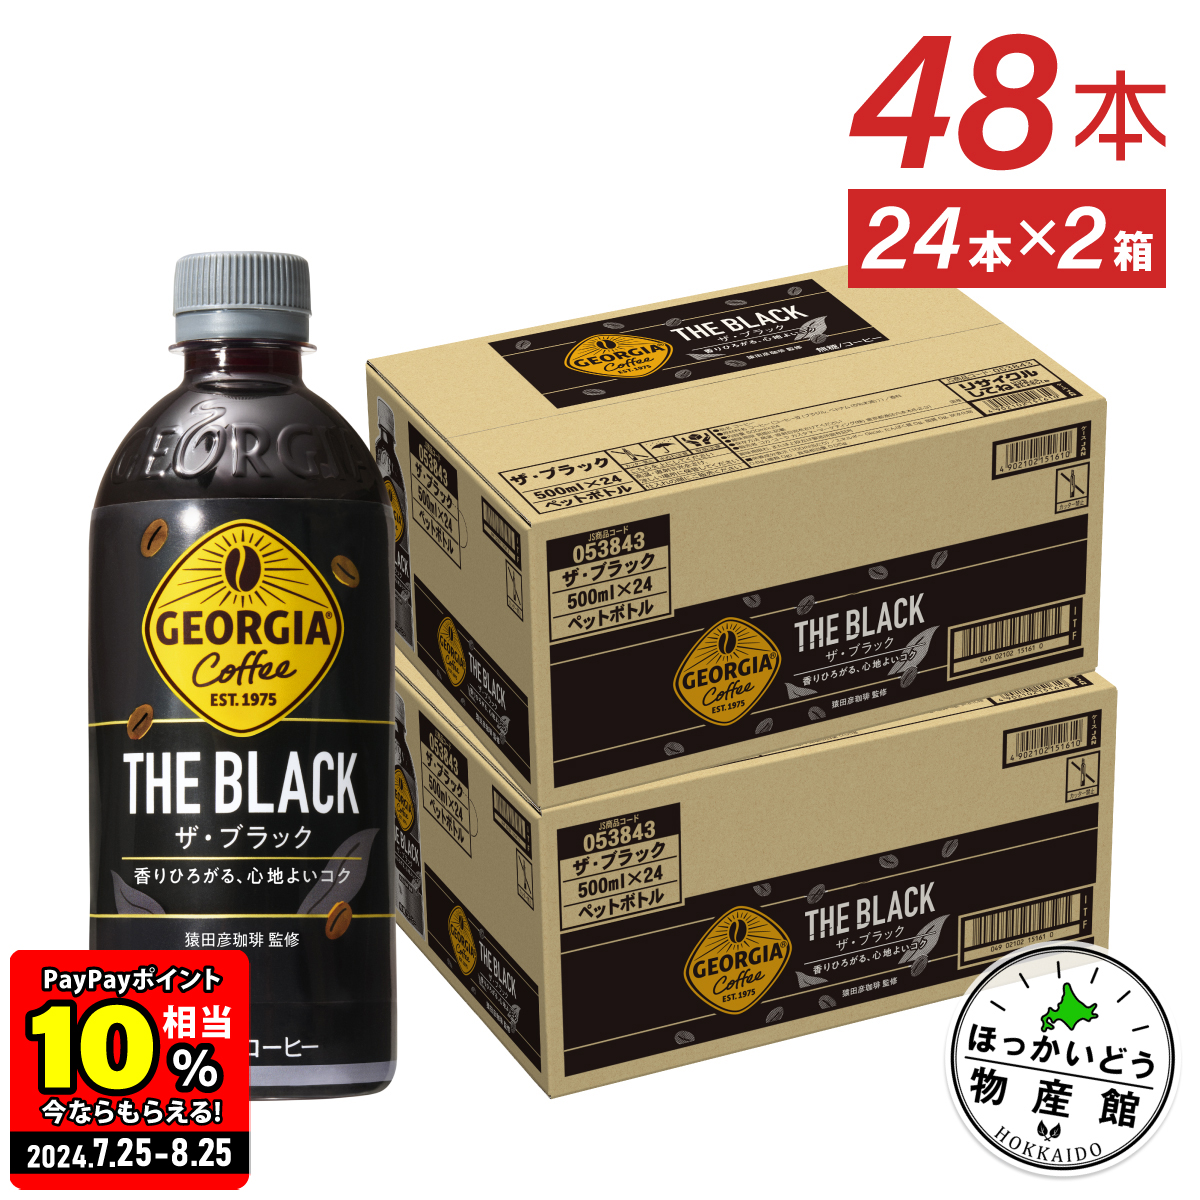 * entry .P15% attaching .* coffee PET bottle box buying black less sugar George a The THE black 500mlPET×48ps.@ free shipping 